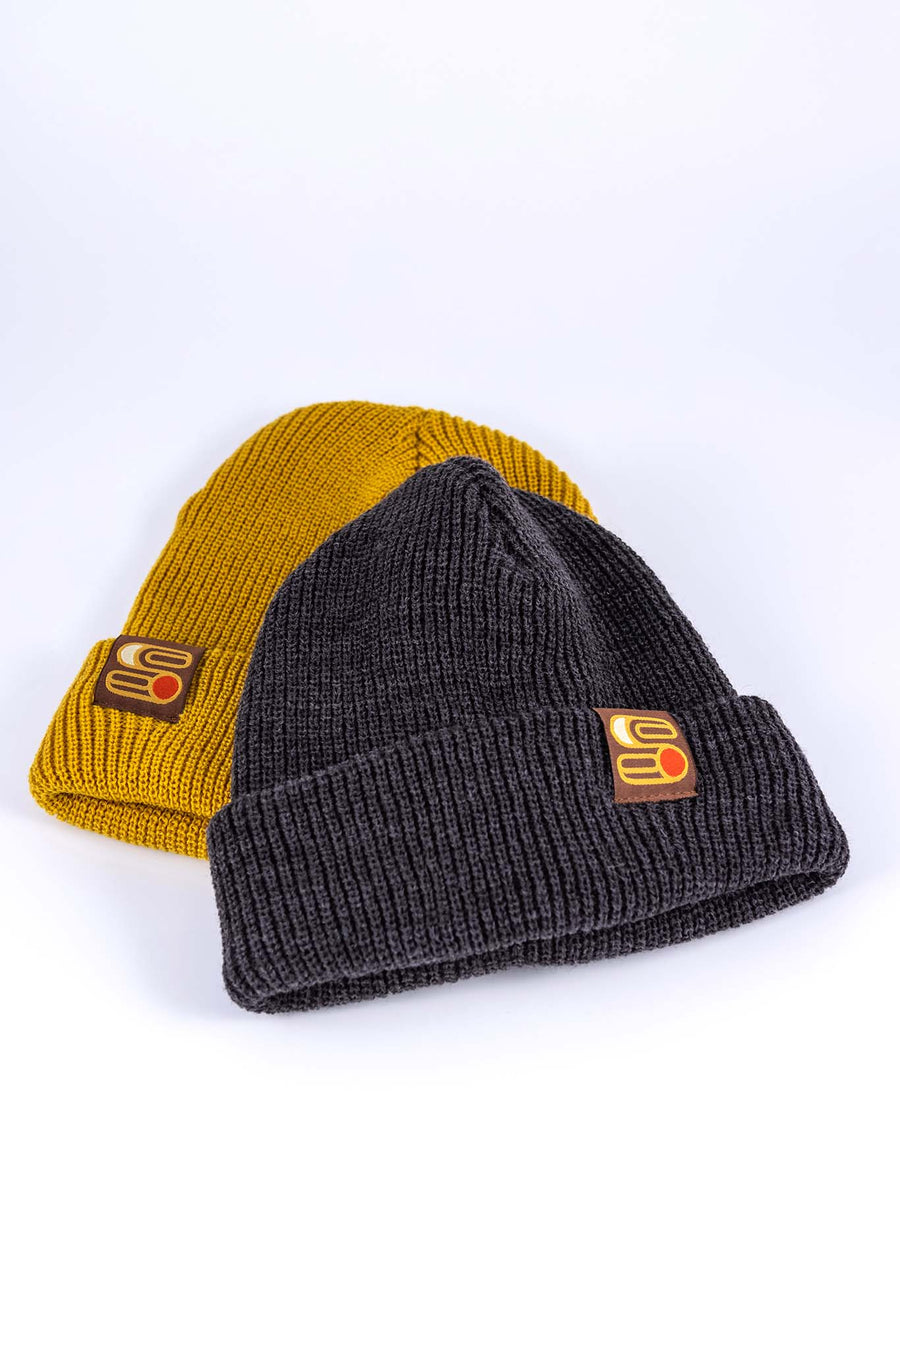 Sound As Ever Beanie shown in yellow and gray colors with Sound as Ever Logo tag